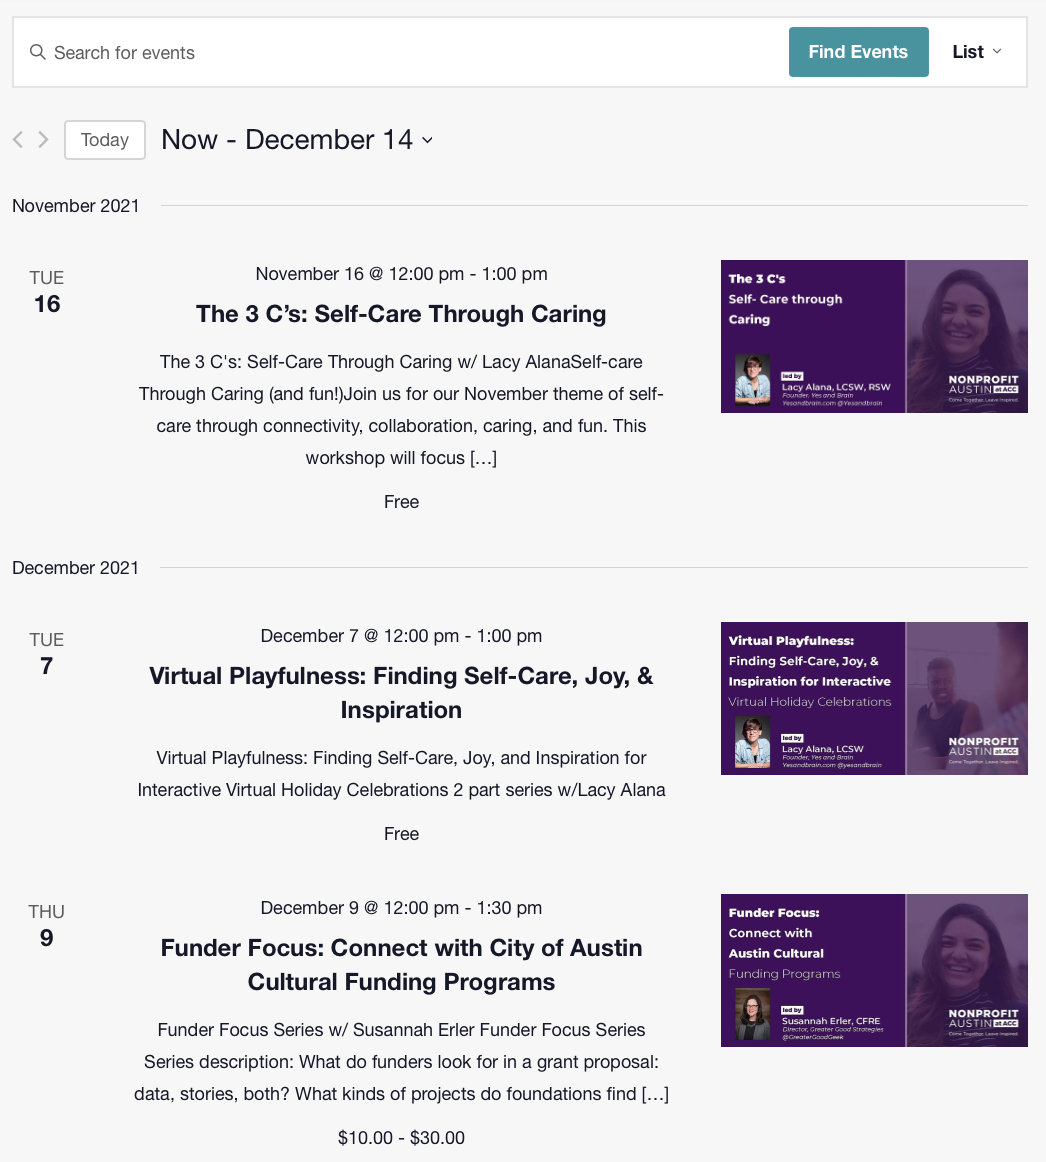 Nonprofit Austin at Austin Community College shows future events in List View for both free and paid events.